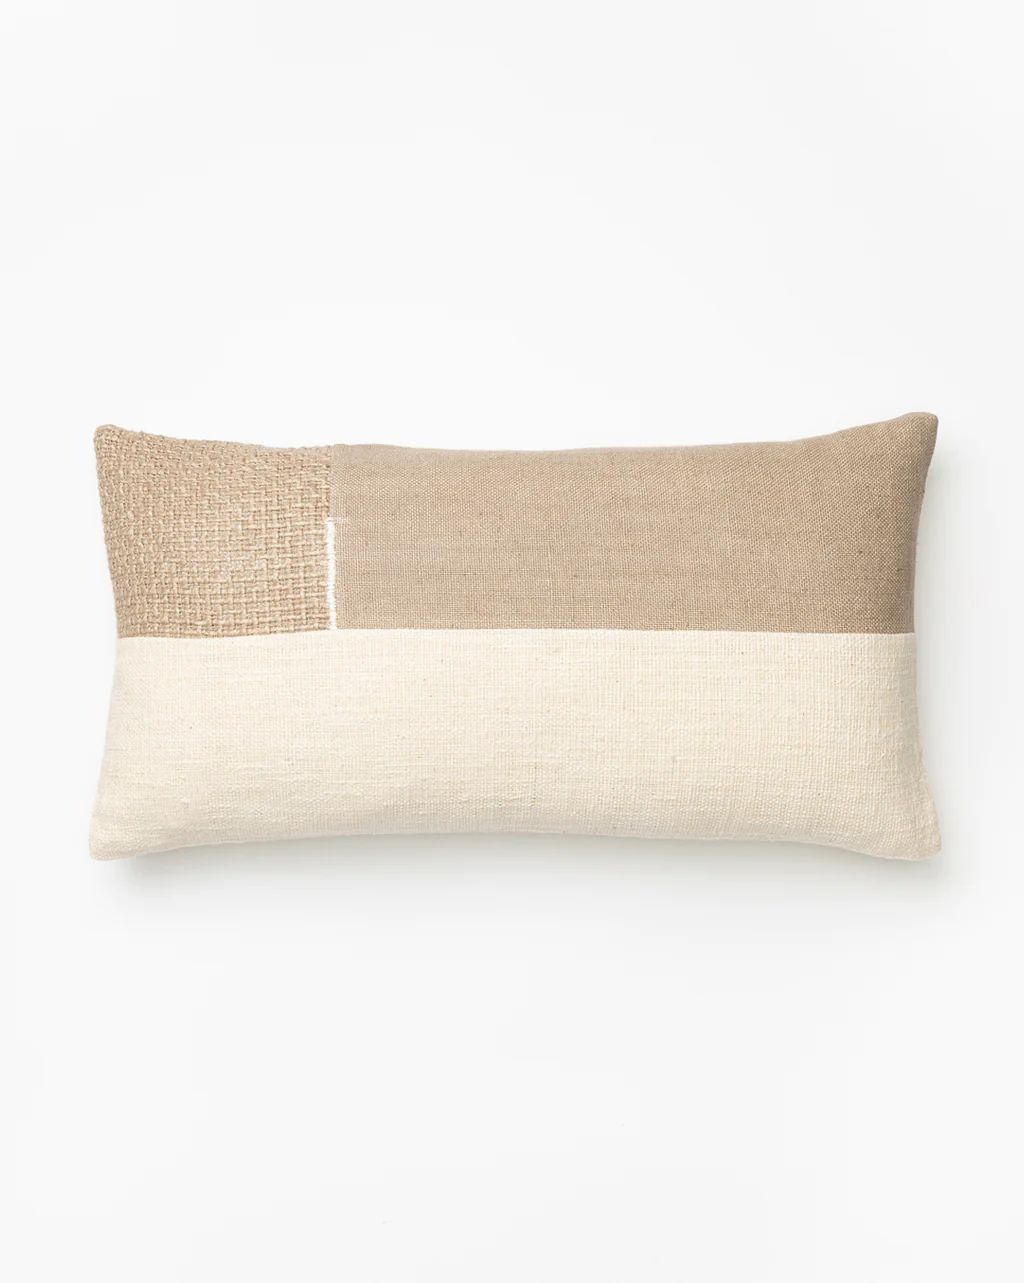 Persephone Pillow | McGee & Co.